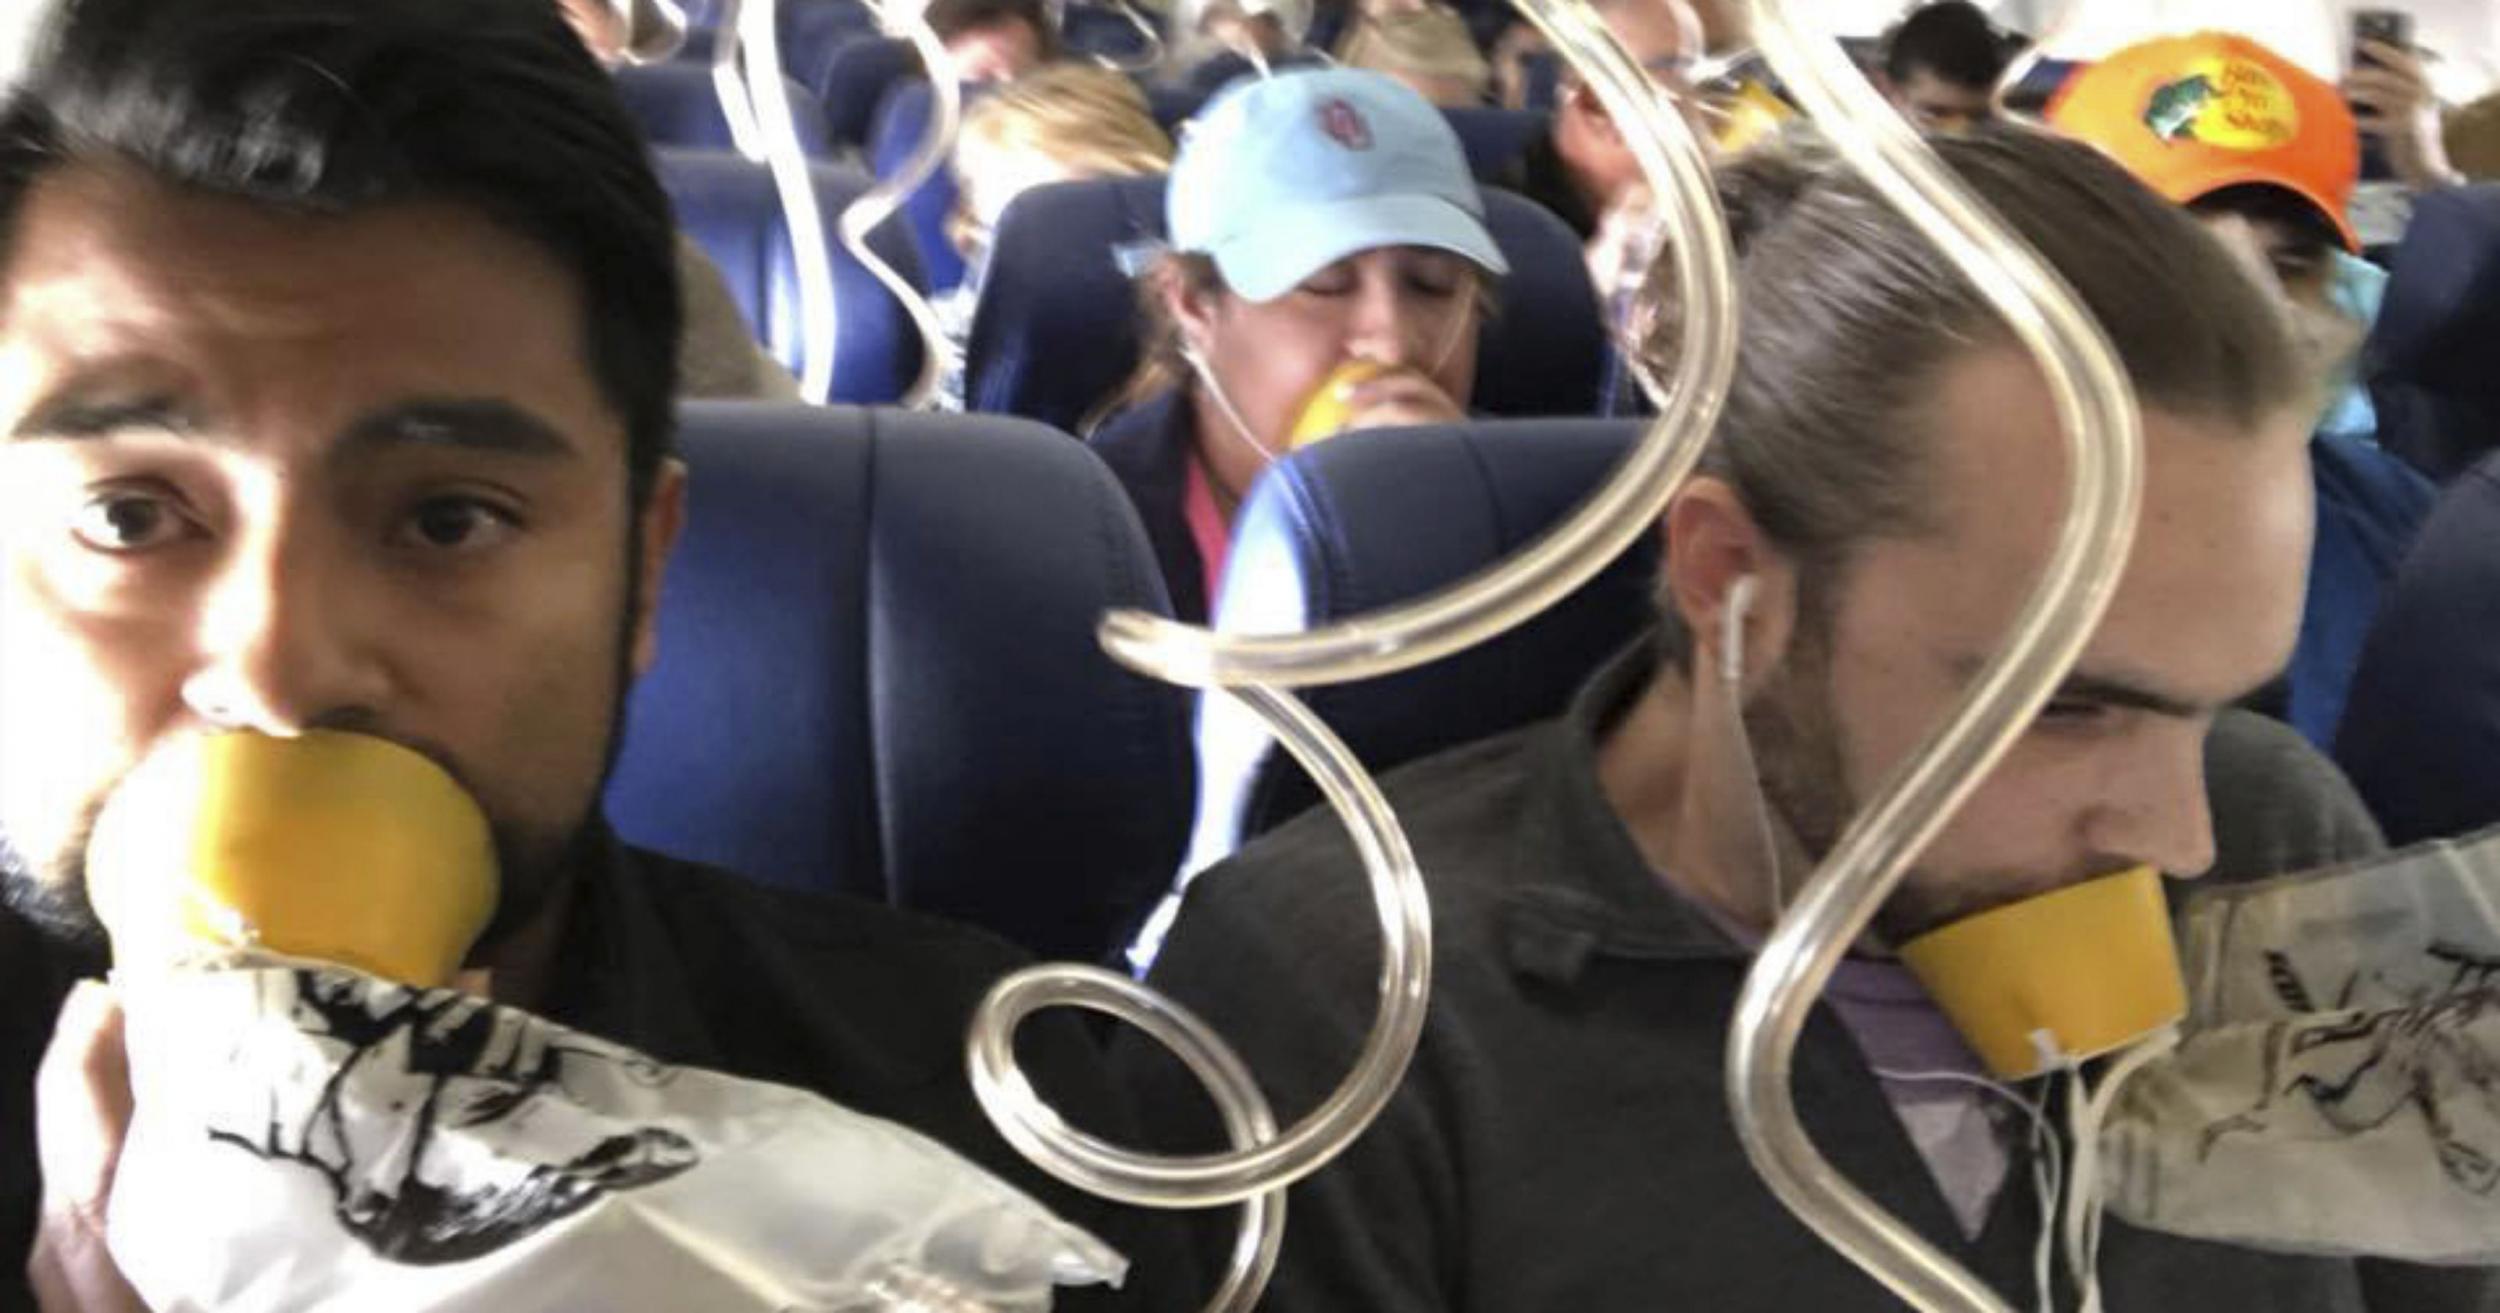 Oxygen masks should be placed over the nose and mouth (Facebook/Marty Martinez )